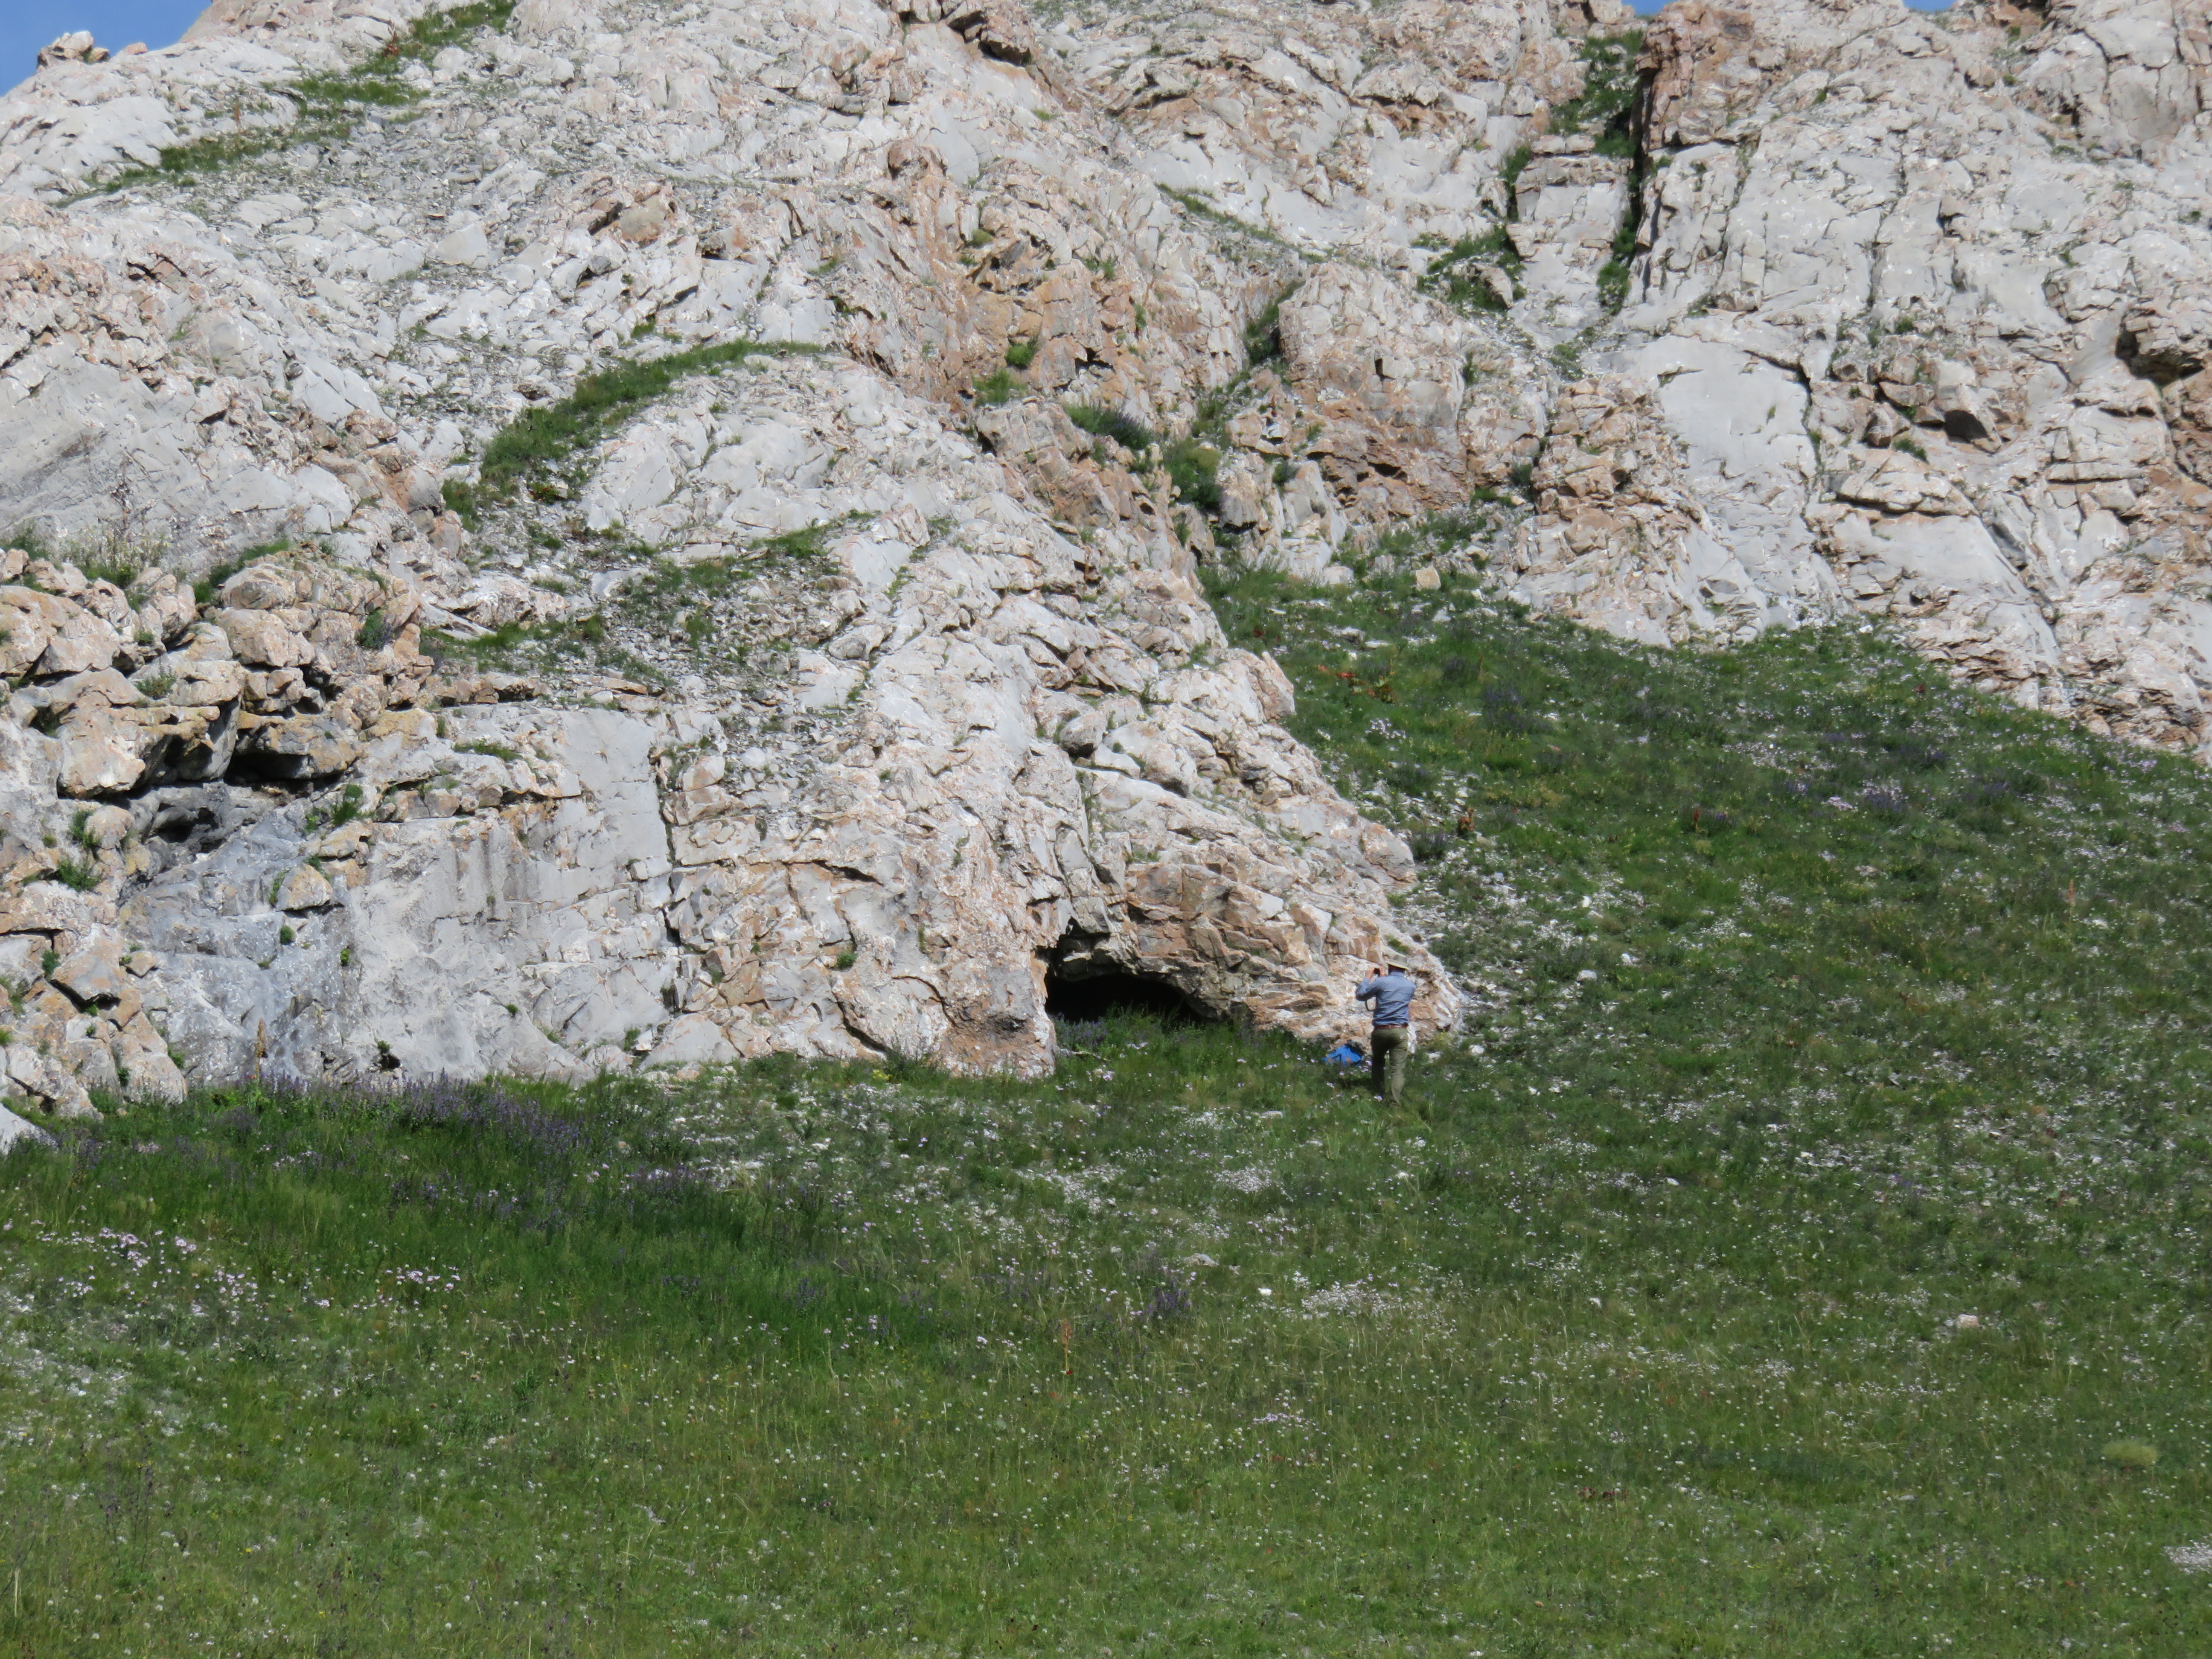 Photo of Dr. Perreault collecting data in front of a rock shelter in Mongolia